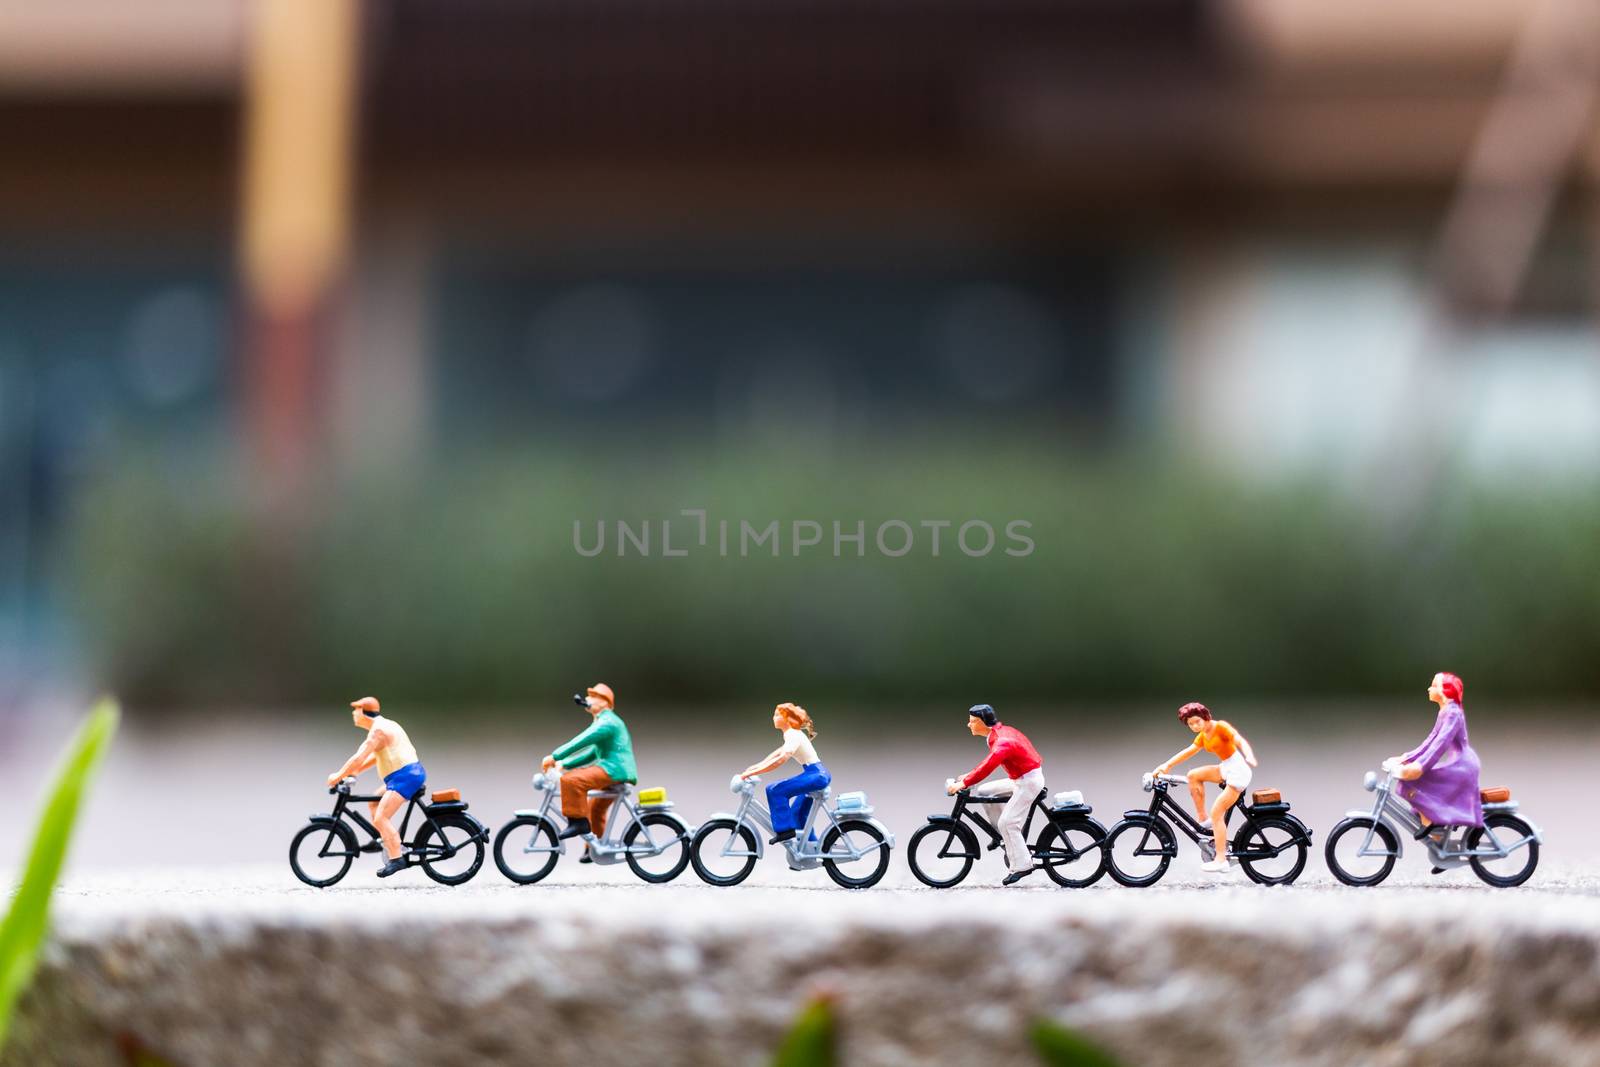 Miniature people travellers with bicycle in the park , Healthy lifestyle concept